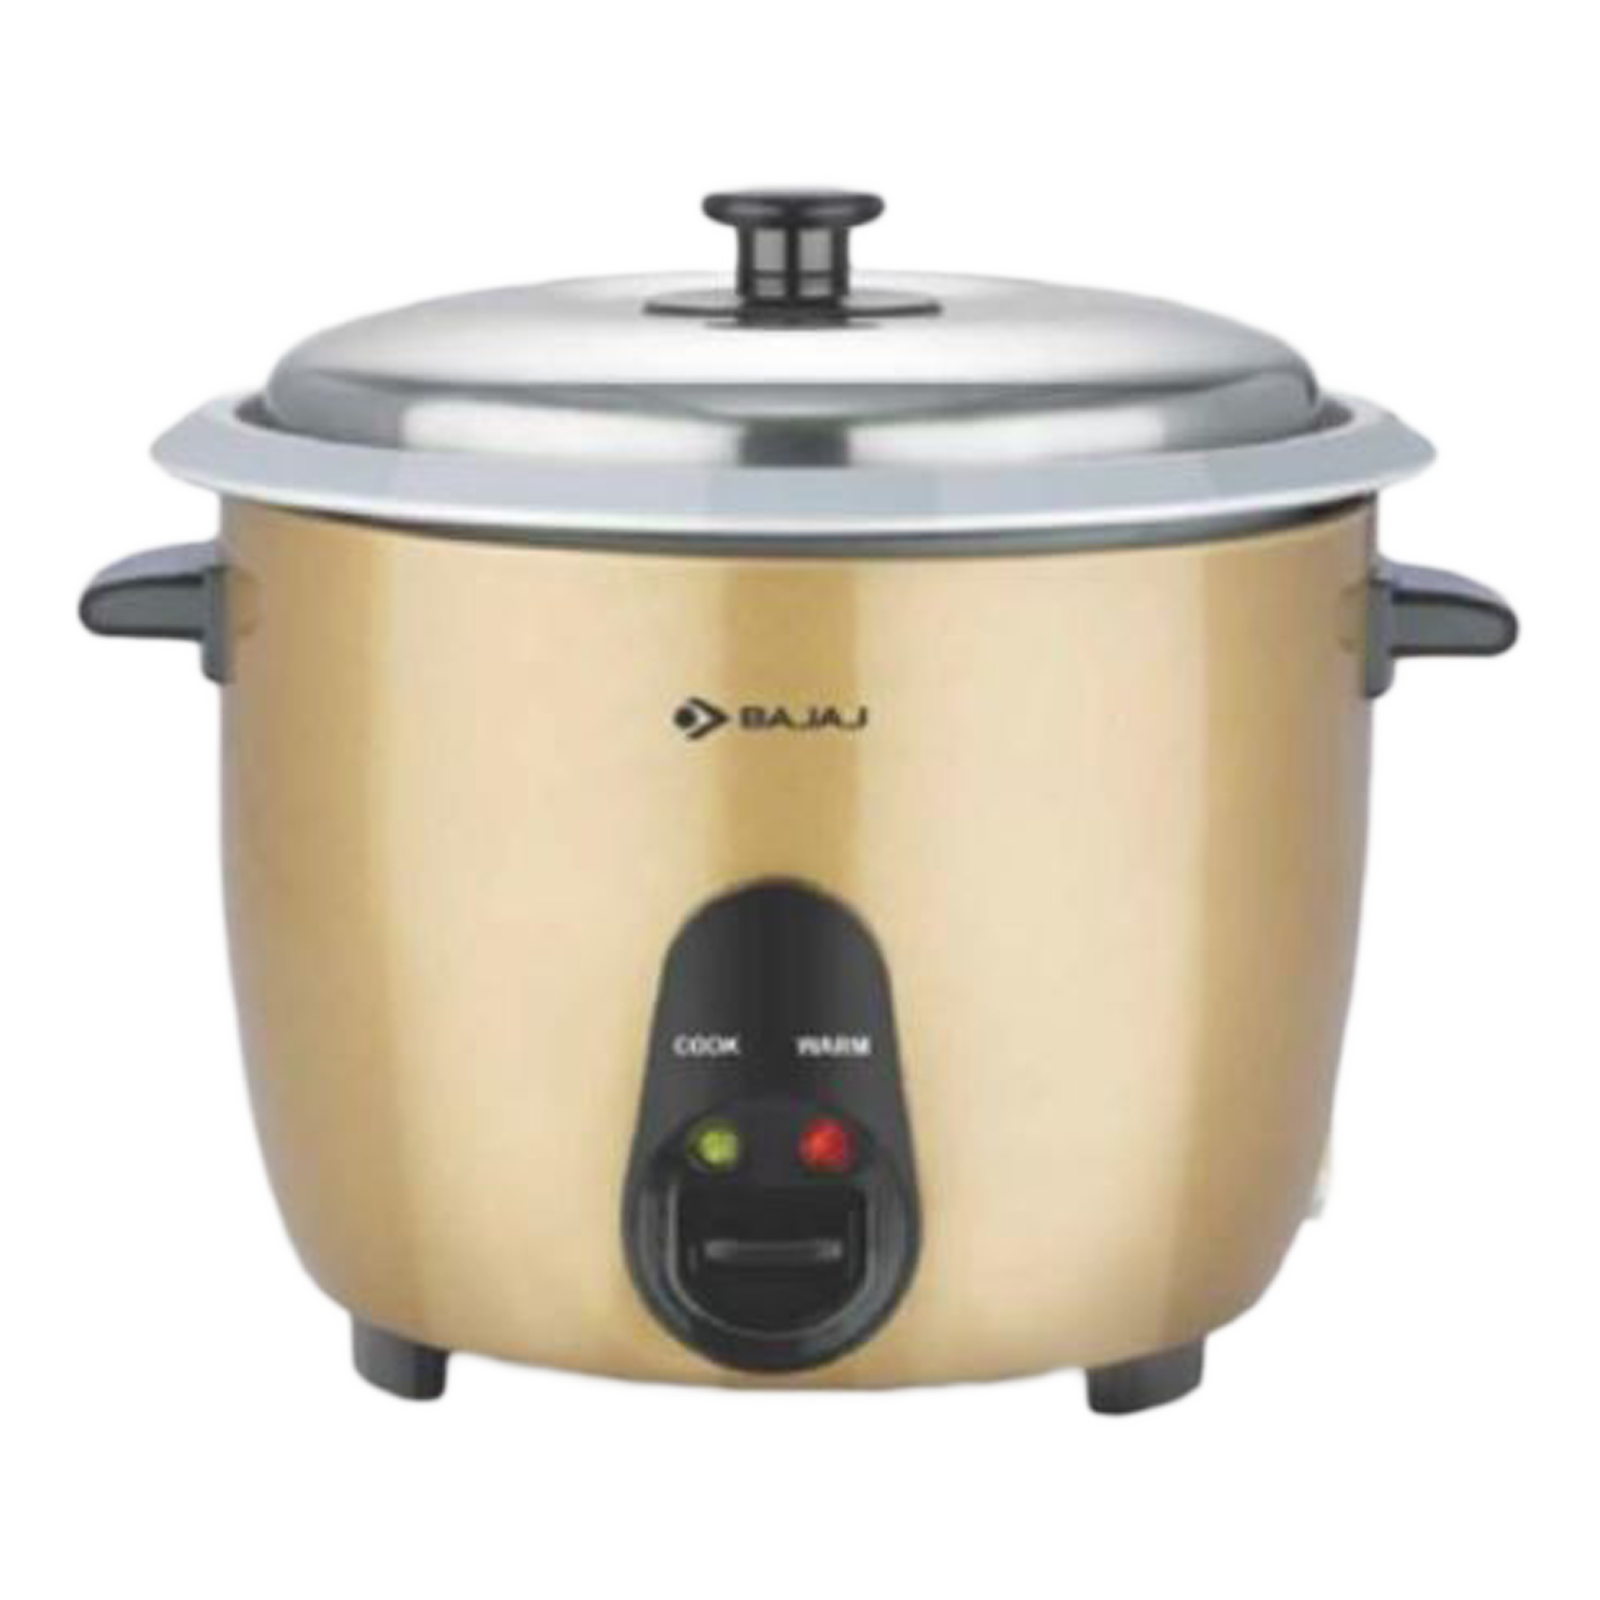 Bajaj DLX Duo 1.8 Litres Electric Rice Cooker (Keep Warm Function, 680103, Gold)_1